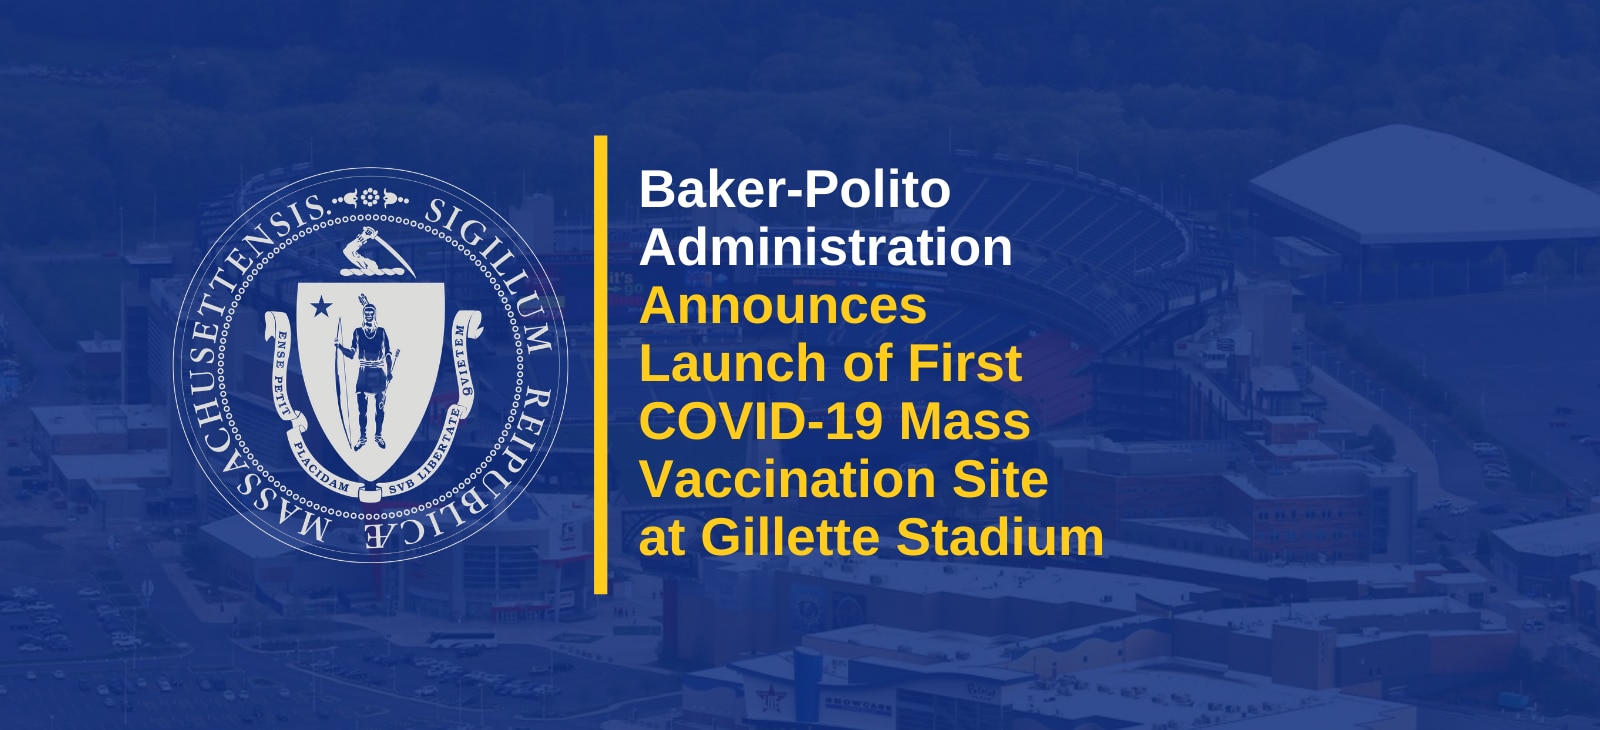 Baker-Polito Administration Announces Launch of First COVID-19 Mass Vaccination Site at Gillette Stadium